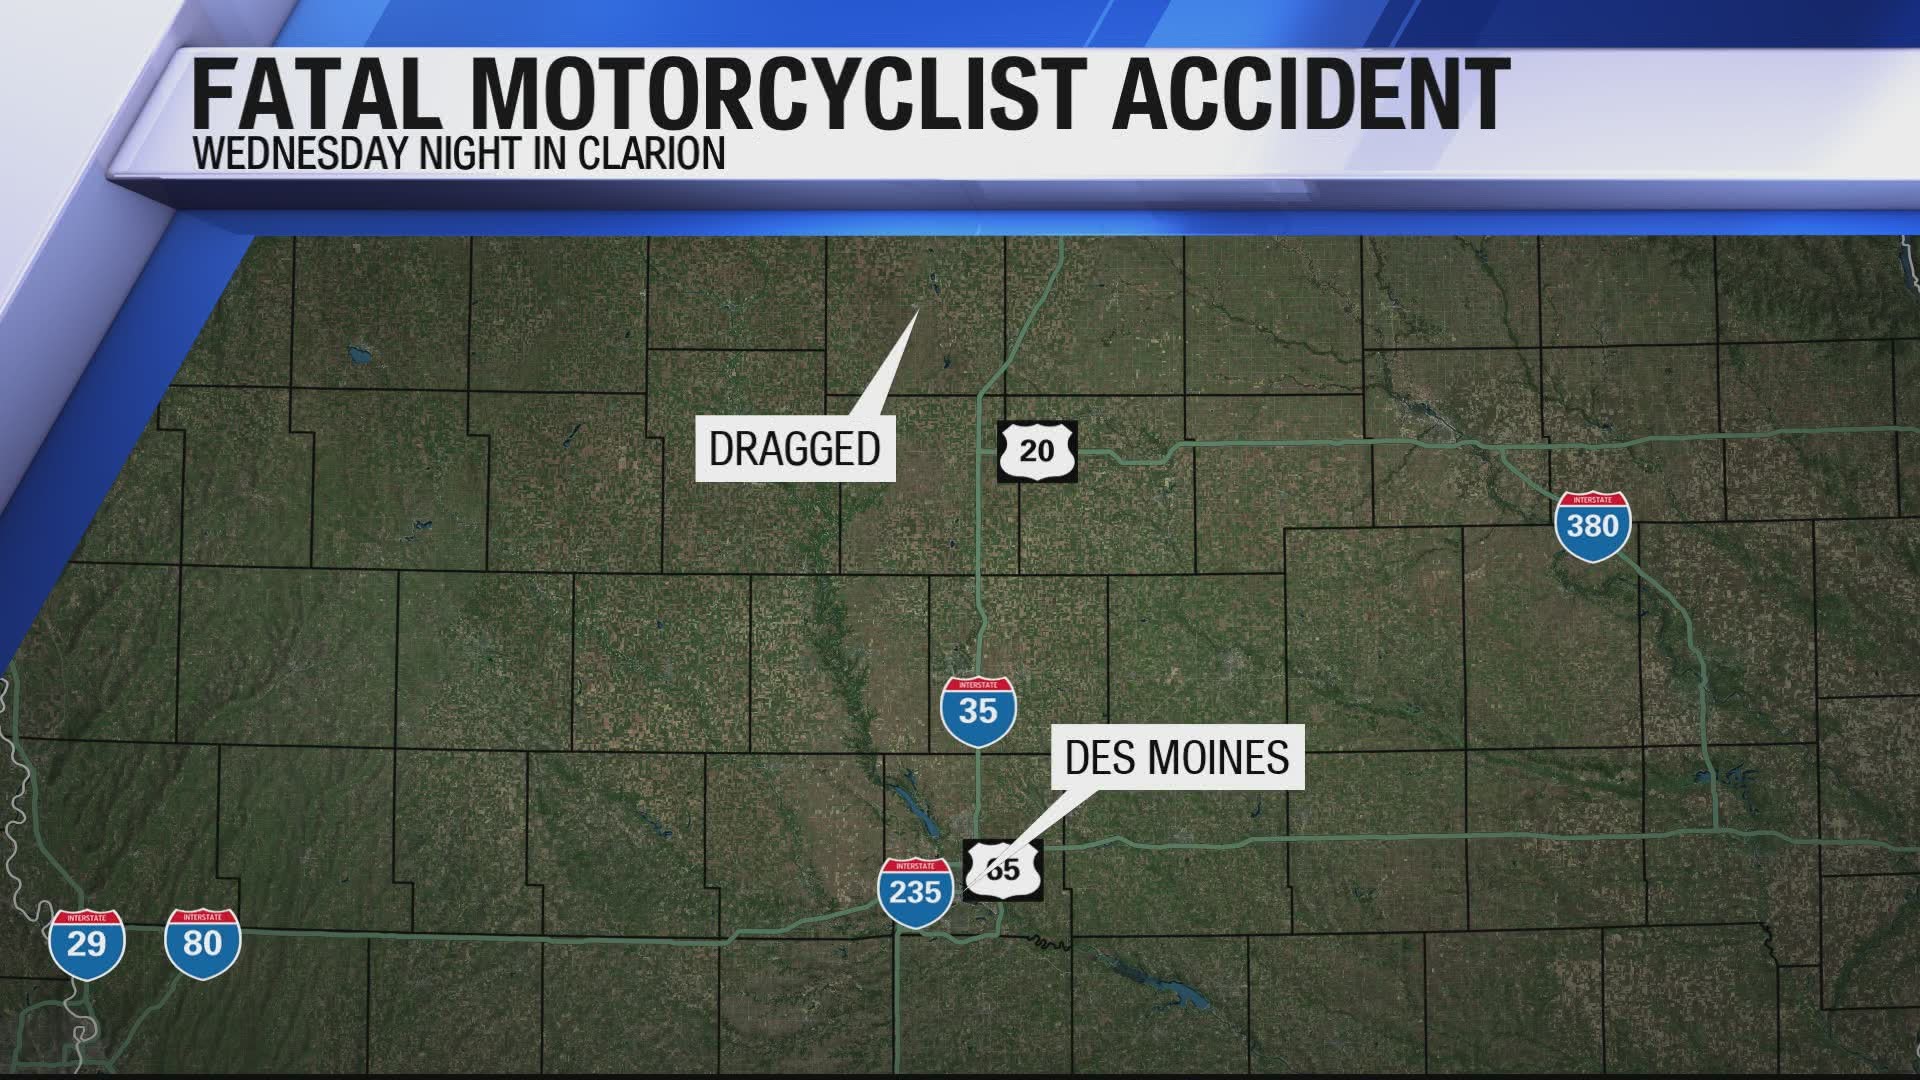 A Wright County motorcyclist is dead after being dragged Wednesday evening.